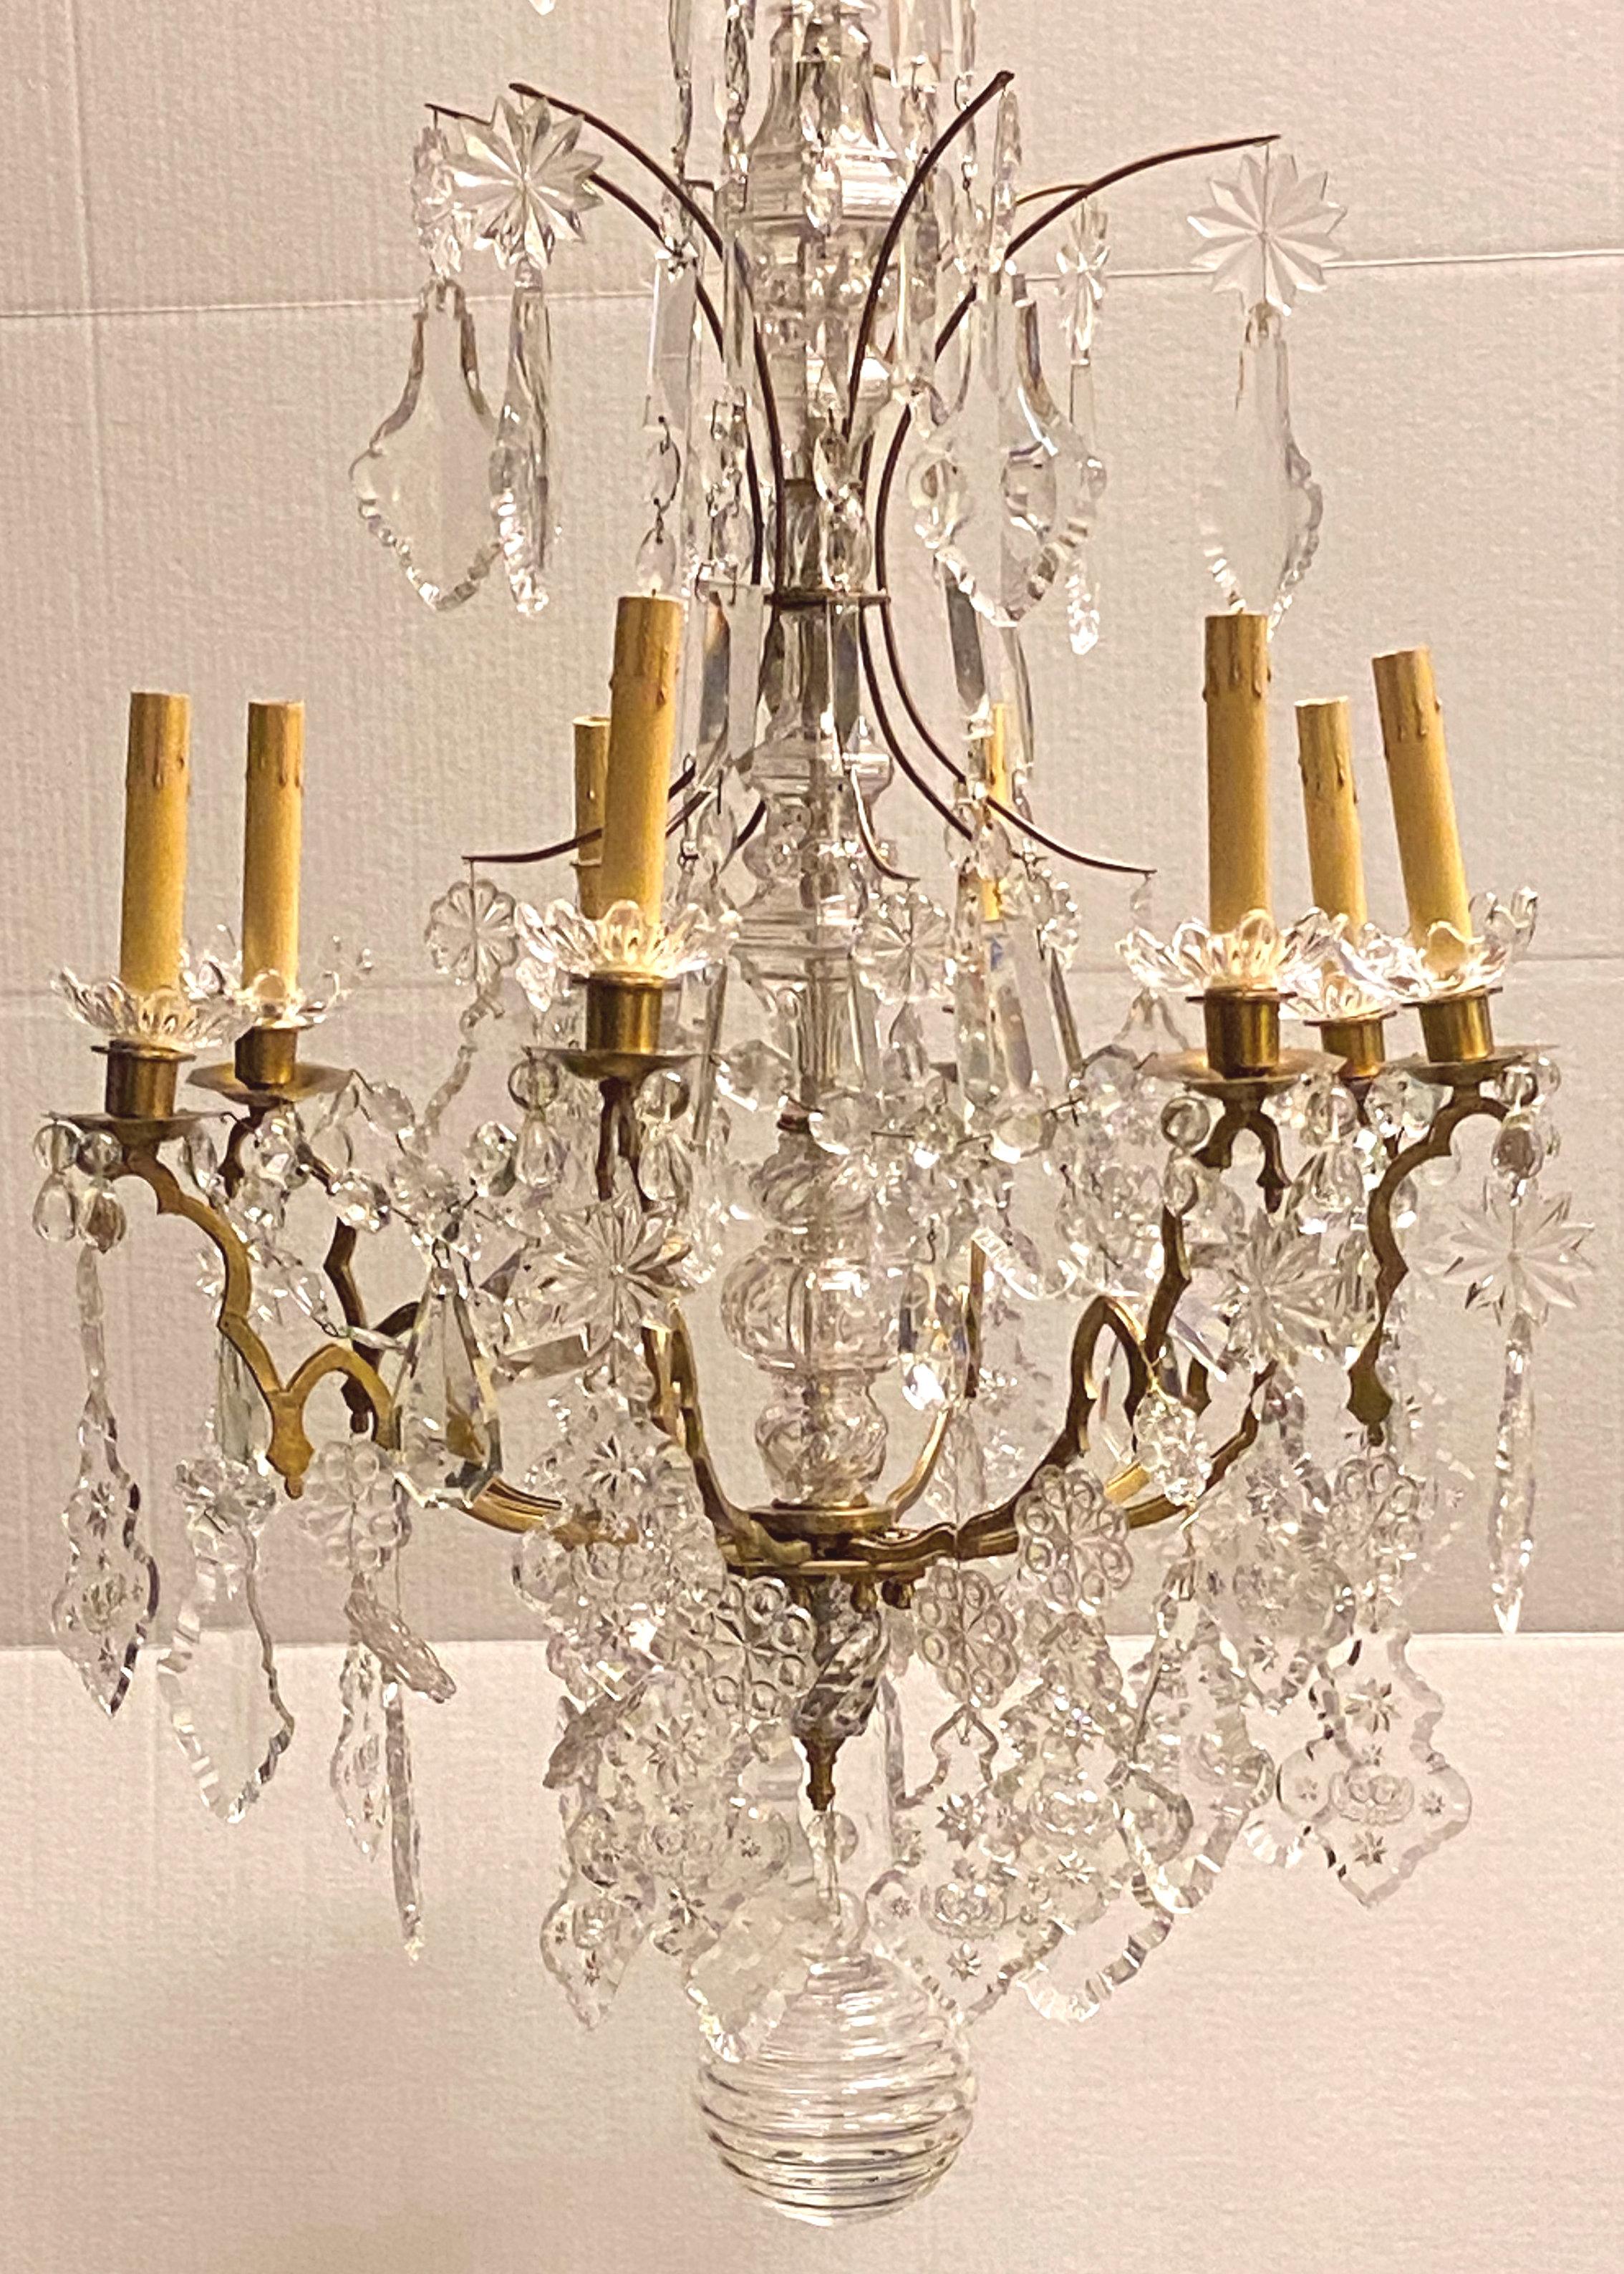 French Louis XVI style bronze and crystal cage form chandelier attributed to Baccarat
crystal bobeches are signed Baccarat.